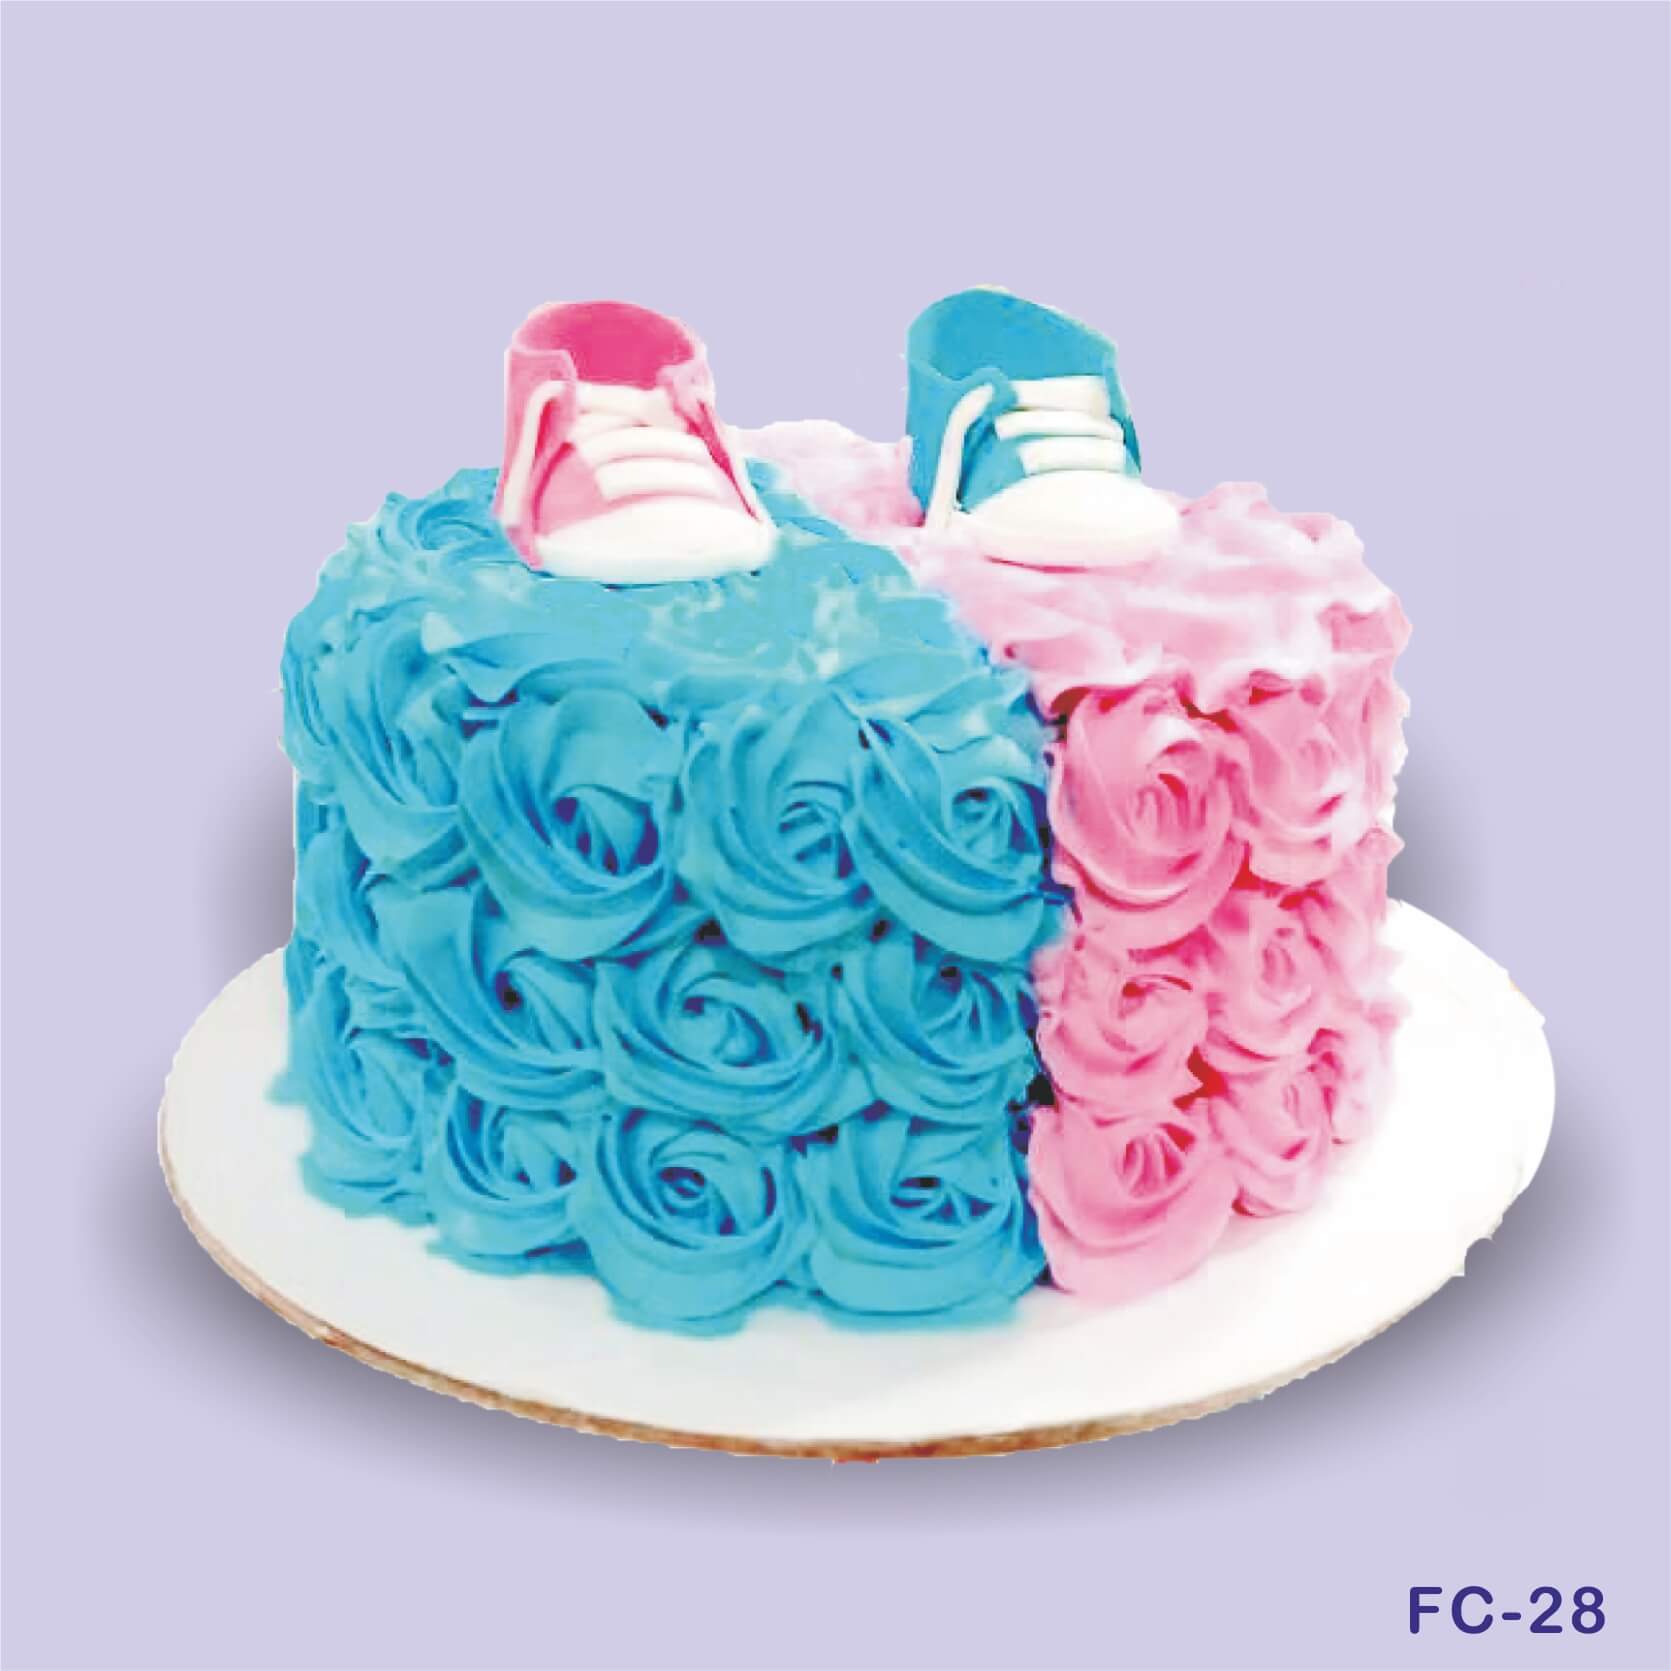 Cute Baby Shower Cake Ideas to Lit up Baby Shower Party